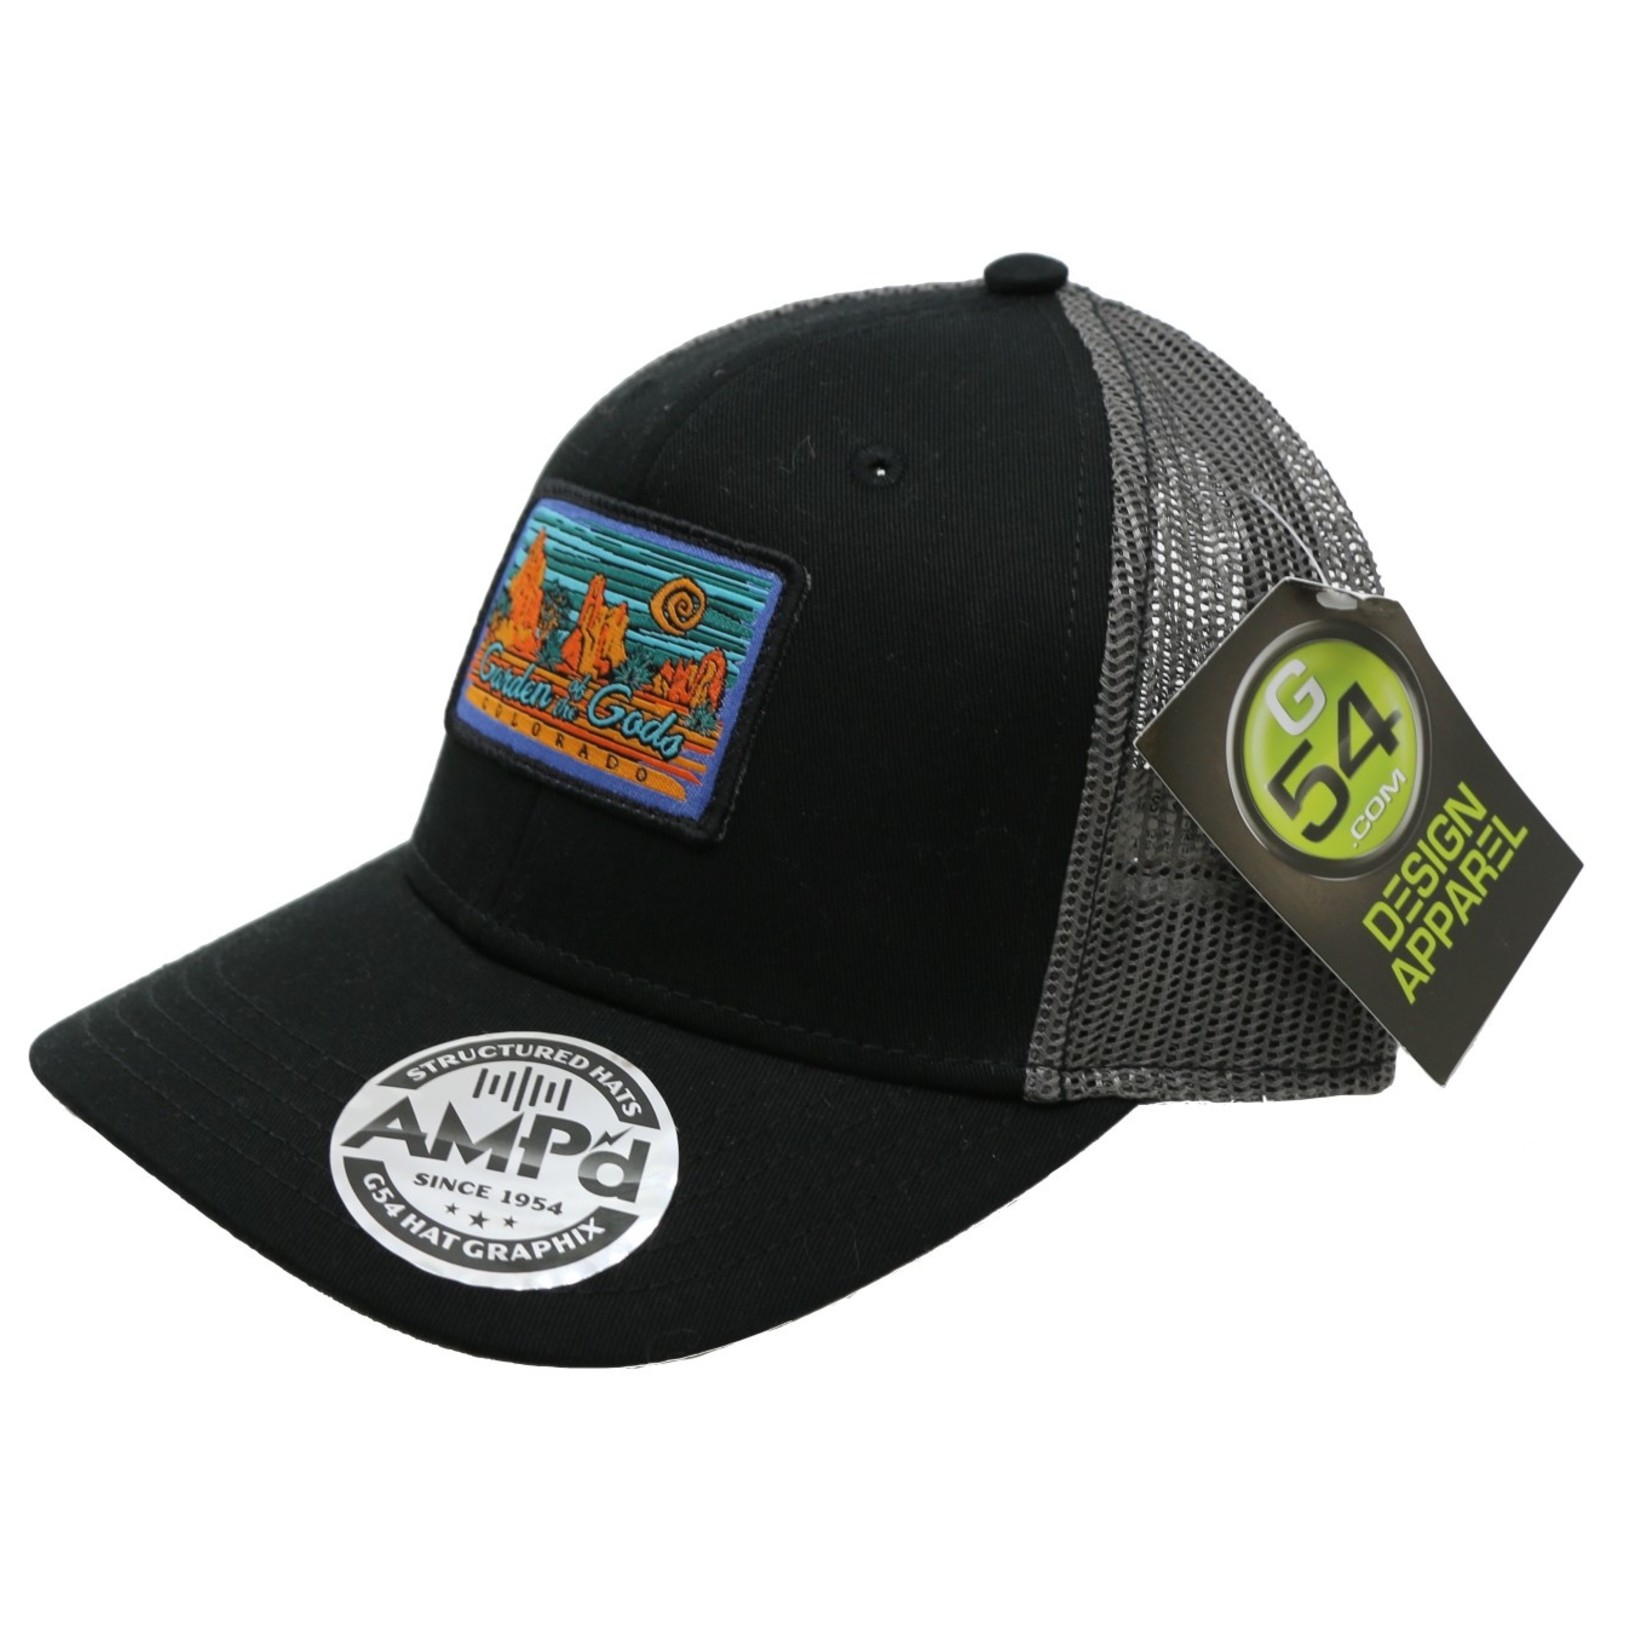 GREAT MOUNTAIN WEST Cotton and Mesh Patch Snapback Cap - Black